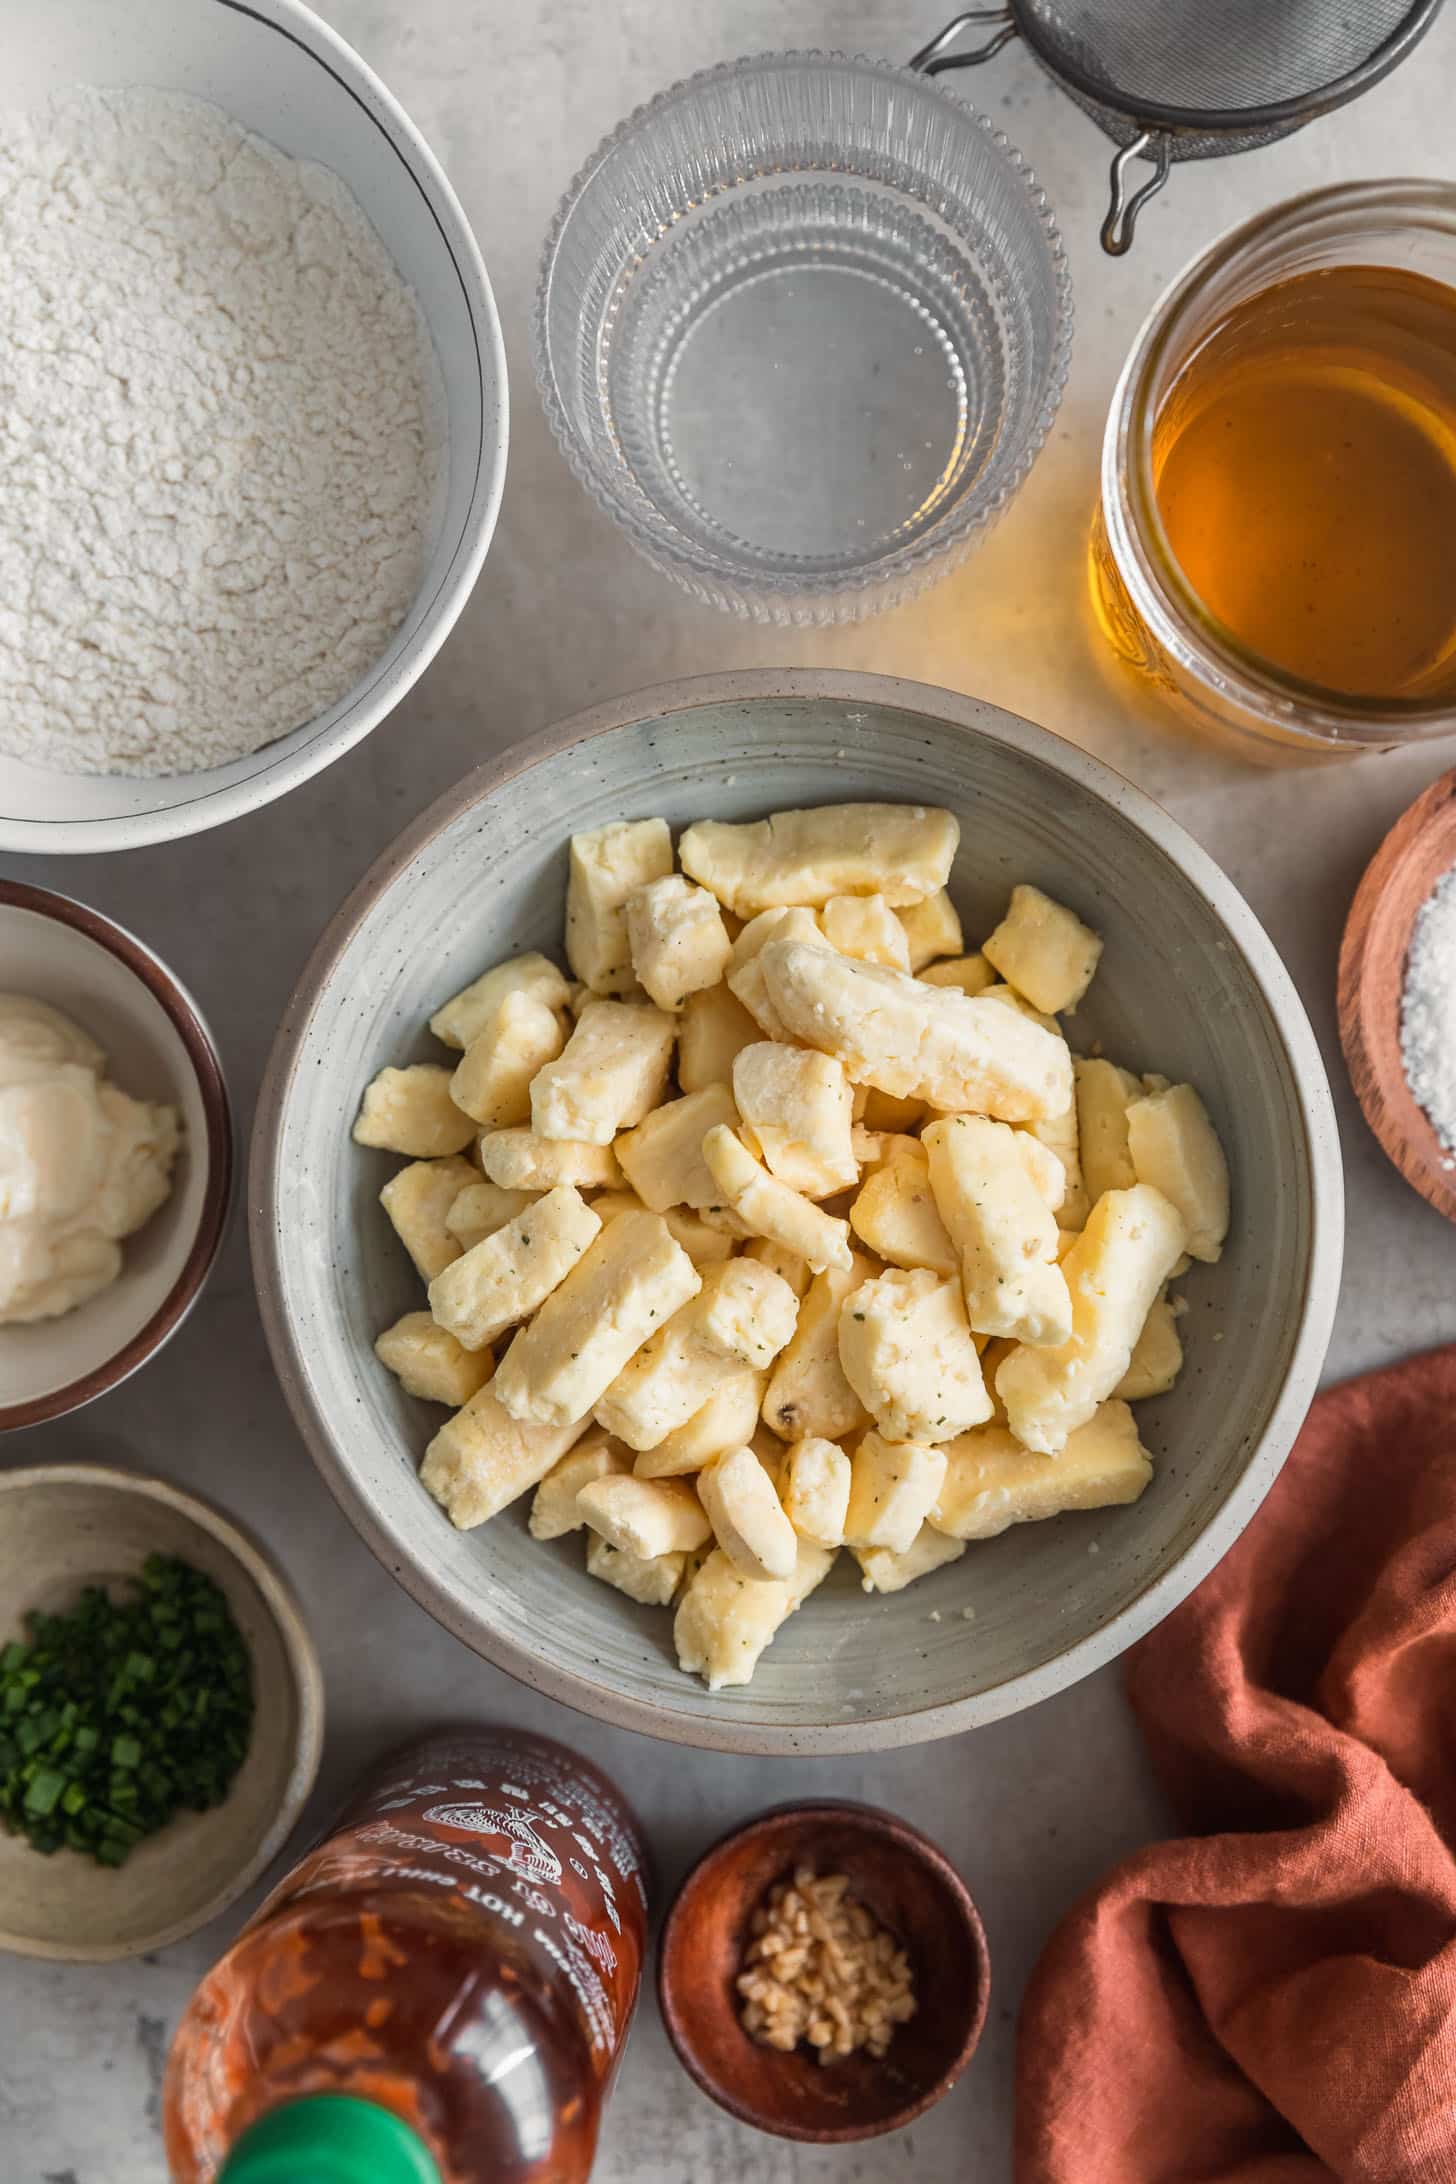 A grey bowl of cheese curds next to bowls of flour, salt, club soda, oil, and spices on a grey counter.